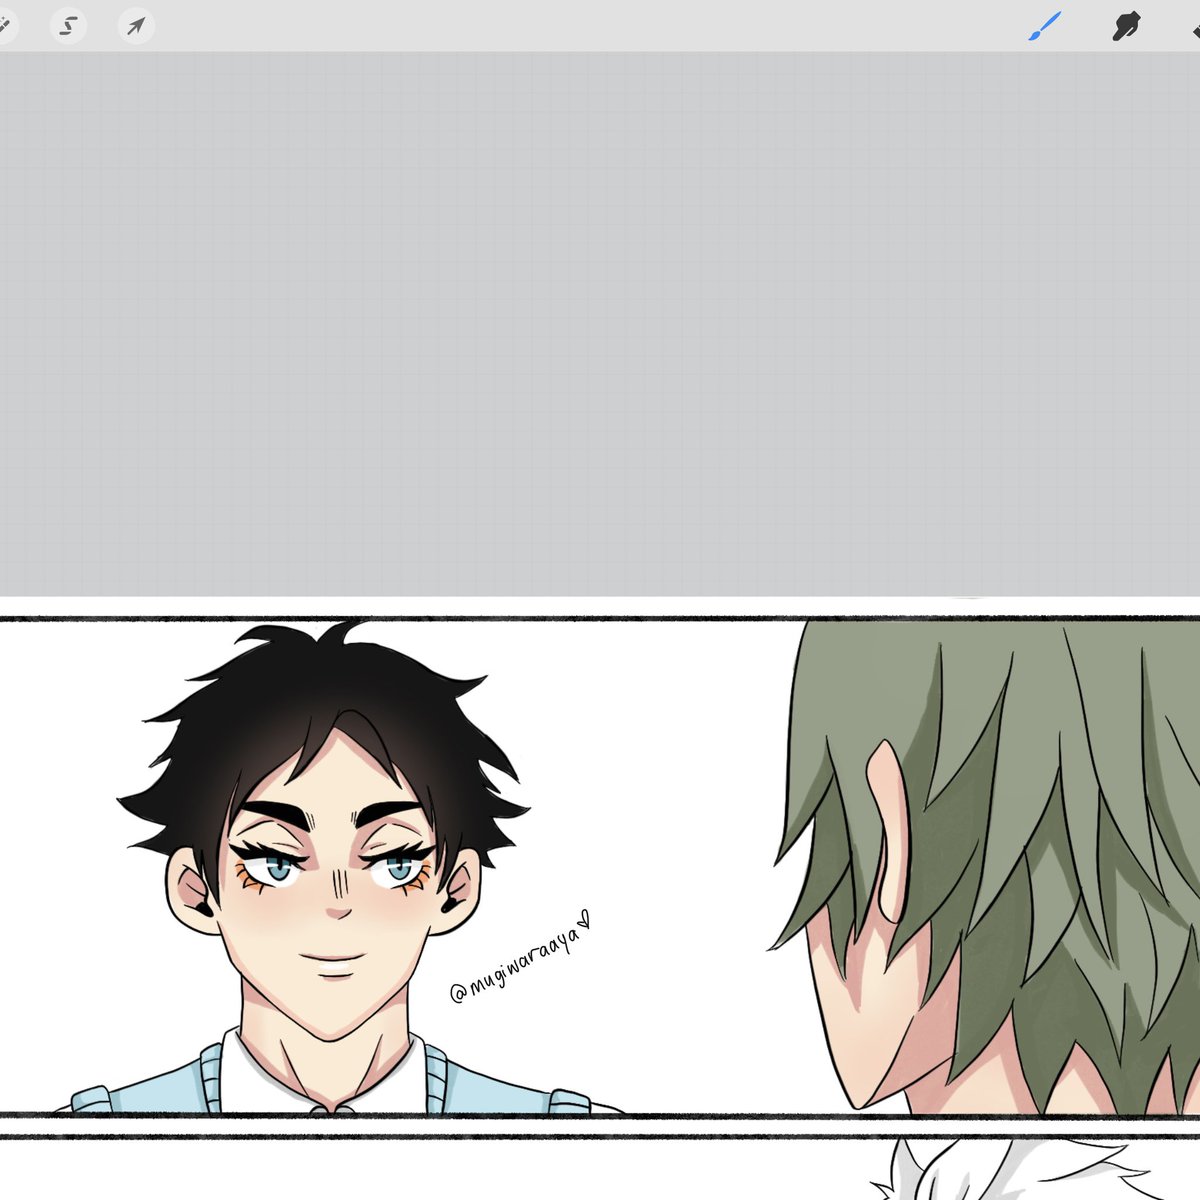 HEYYY here's a little preview of the new bkak comic i'm working on. this is my first time drawing pre-timeskip akaashi KDJSKSK massive wip though 